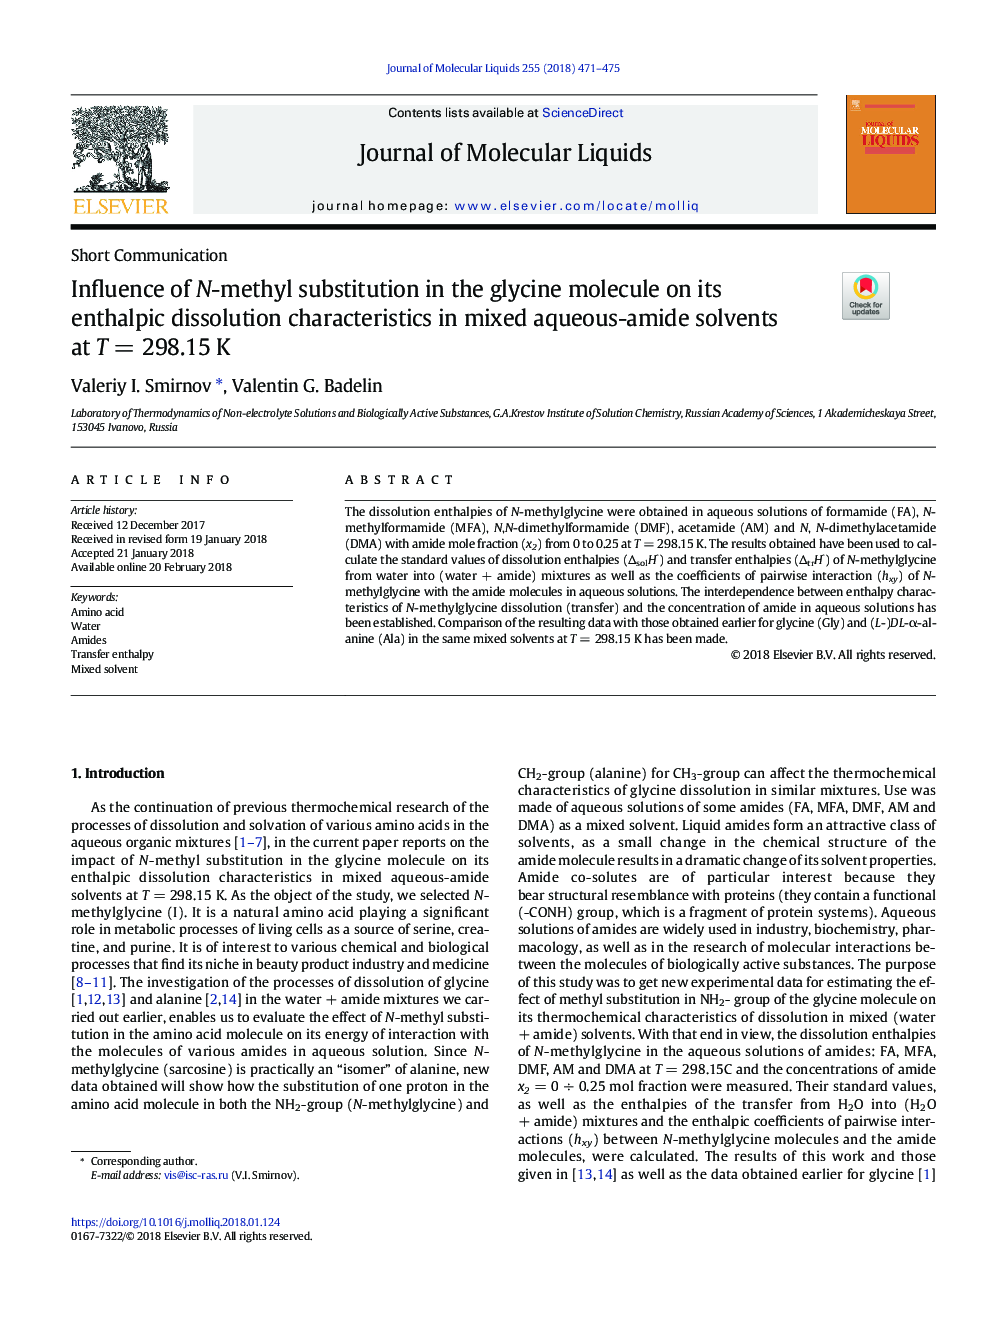 Influence of N-methyl substitution in the glycine molecule on its enthalpic dissolution characteristics in mixed aqueous-amide solvents at TÂ =Â 298.15Â K